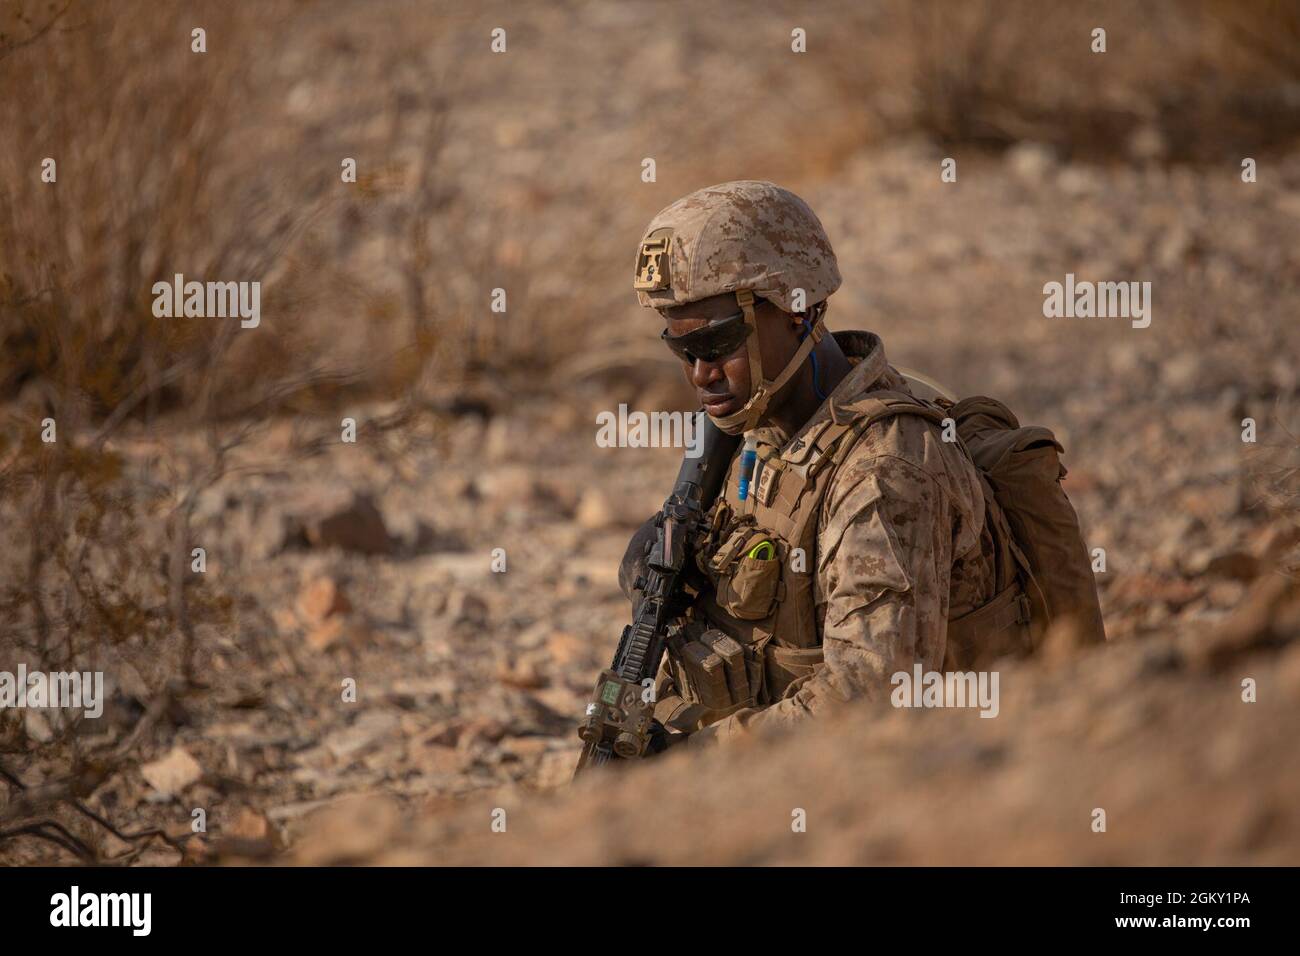 A Marine with Kilo Company, 3rd Battalion, 25th Marines, 4th Marine Division, posts security on Range 400 during Integrated Training Exercise (ITX) 4-21 at Marine Corps Air Ground Combat Center, Twentynine Palms, California on July 23, 2021. Range 400 is a company-sized live-fire assault range that requires complex coordination of fires, producing combat-ready Reserve Marines prepared to augment and reinforce the Active Component. Stock Photo